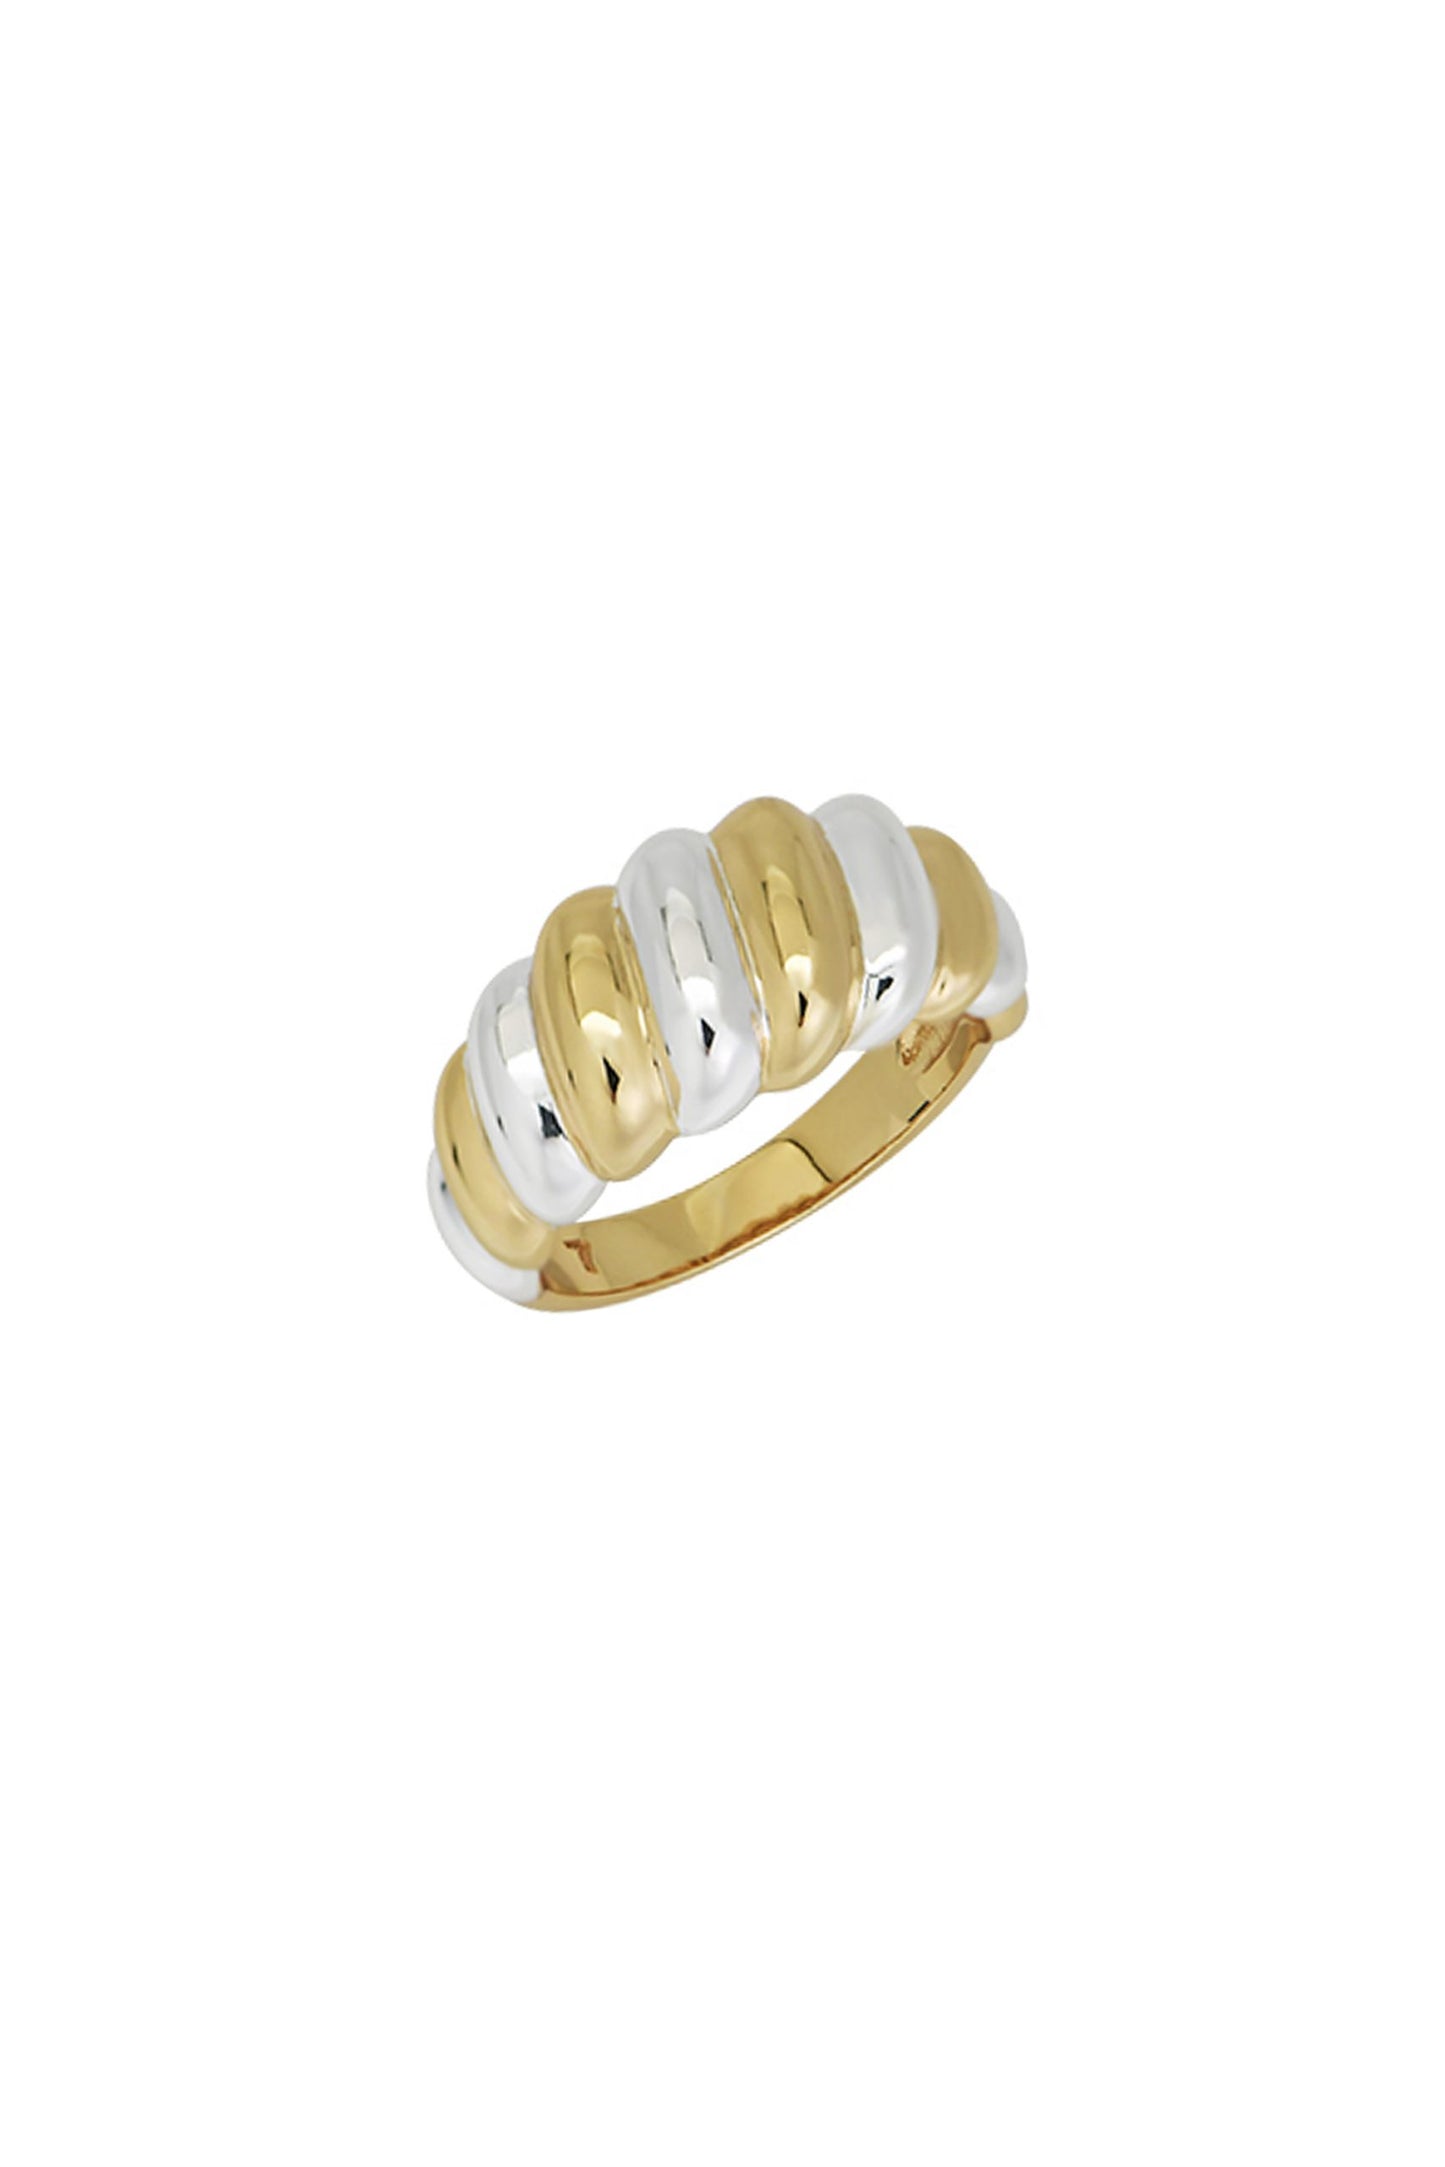 Gold and Silver Twist Ring by T.I.T.S.